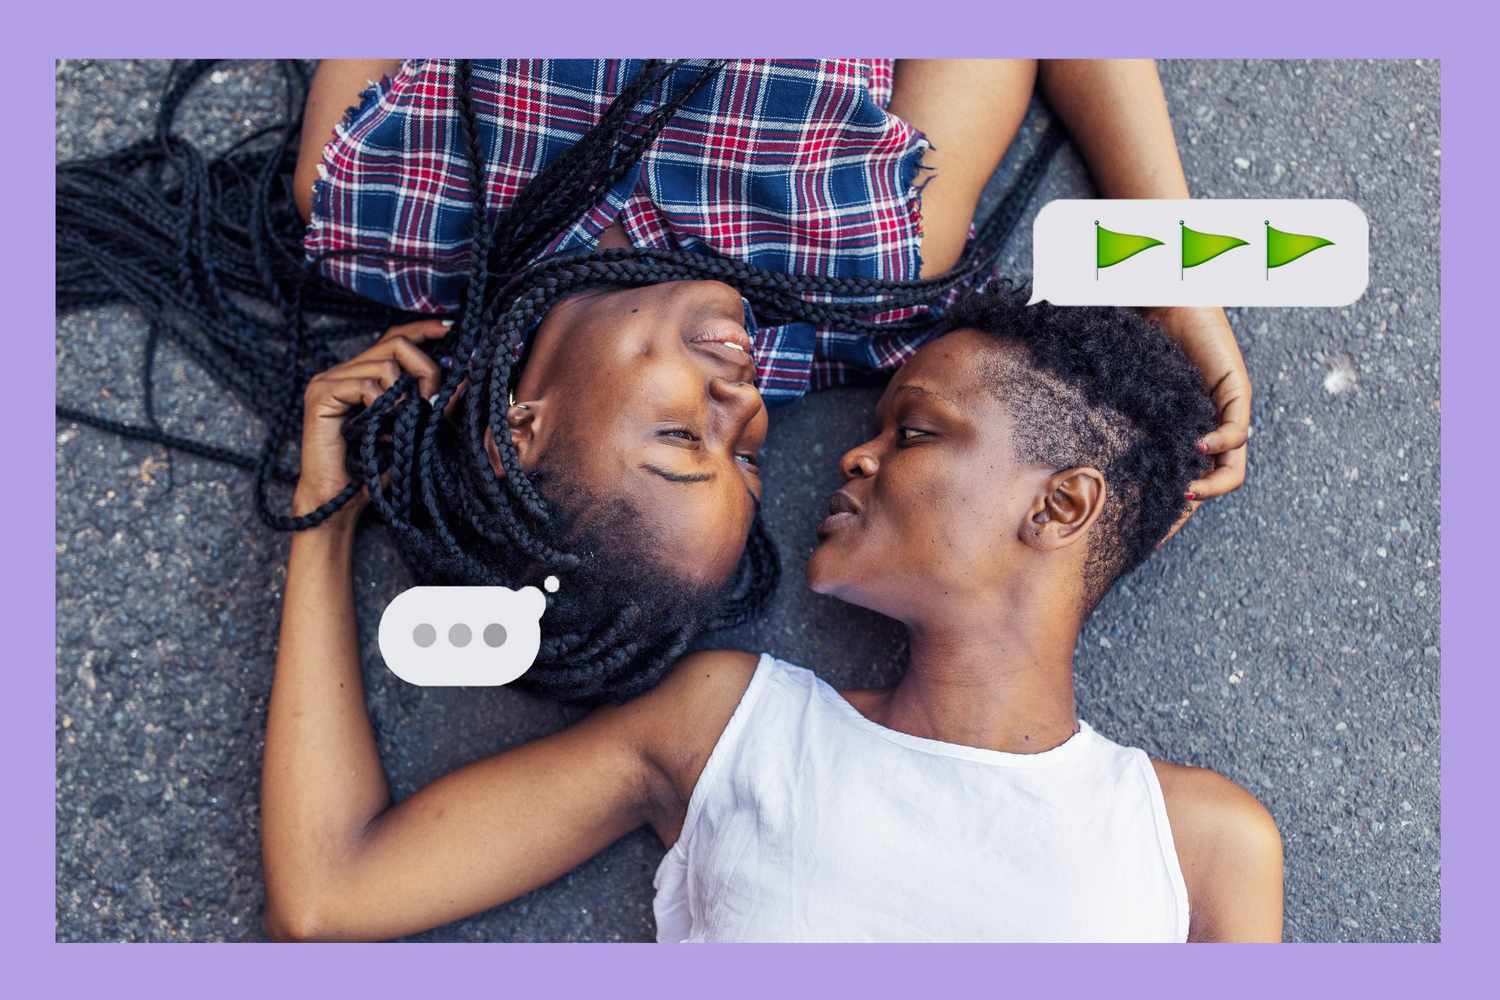 Top down view of 2 girlfriends laying on ground with green flags in a thought bubble